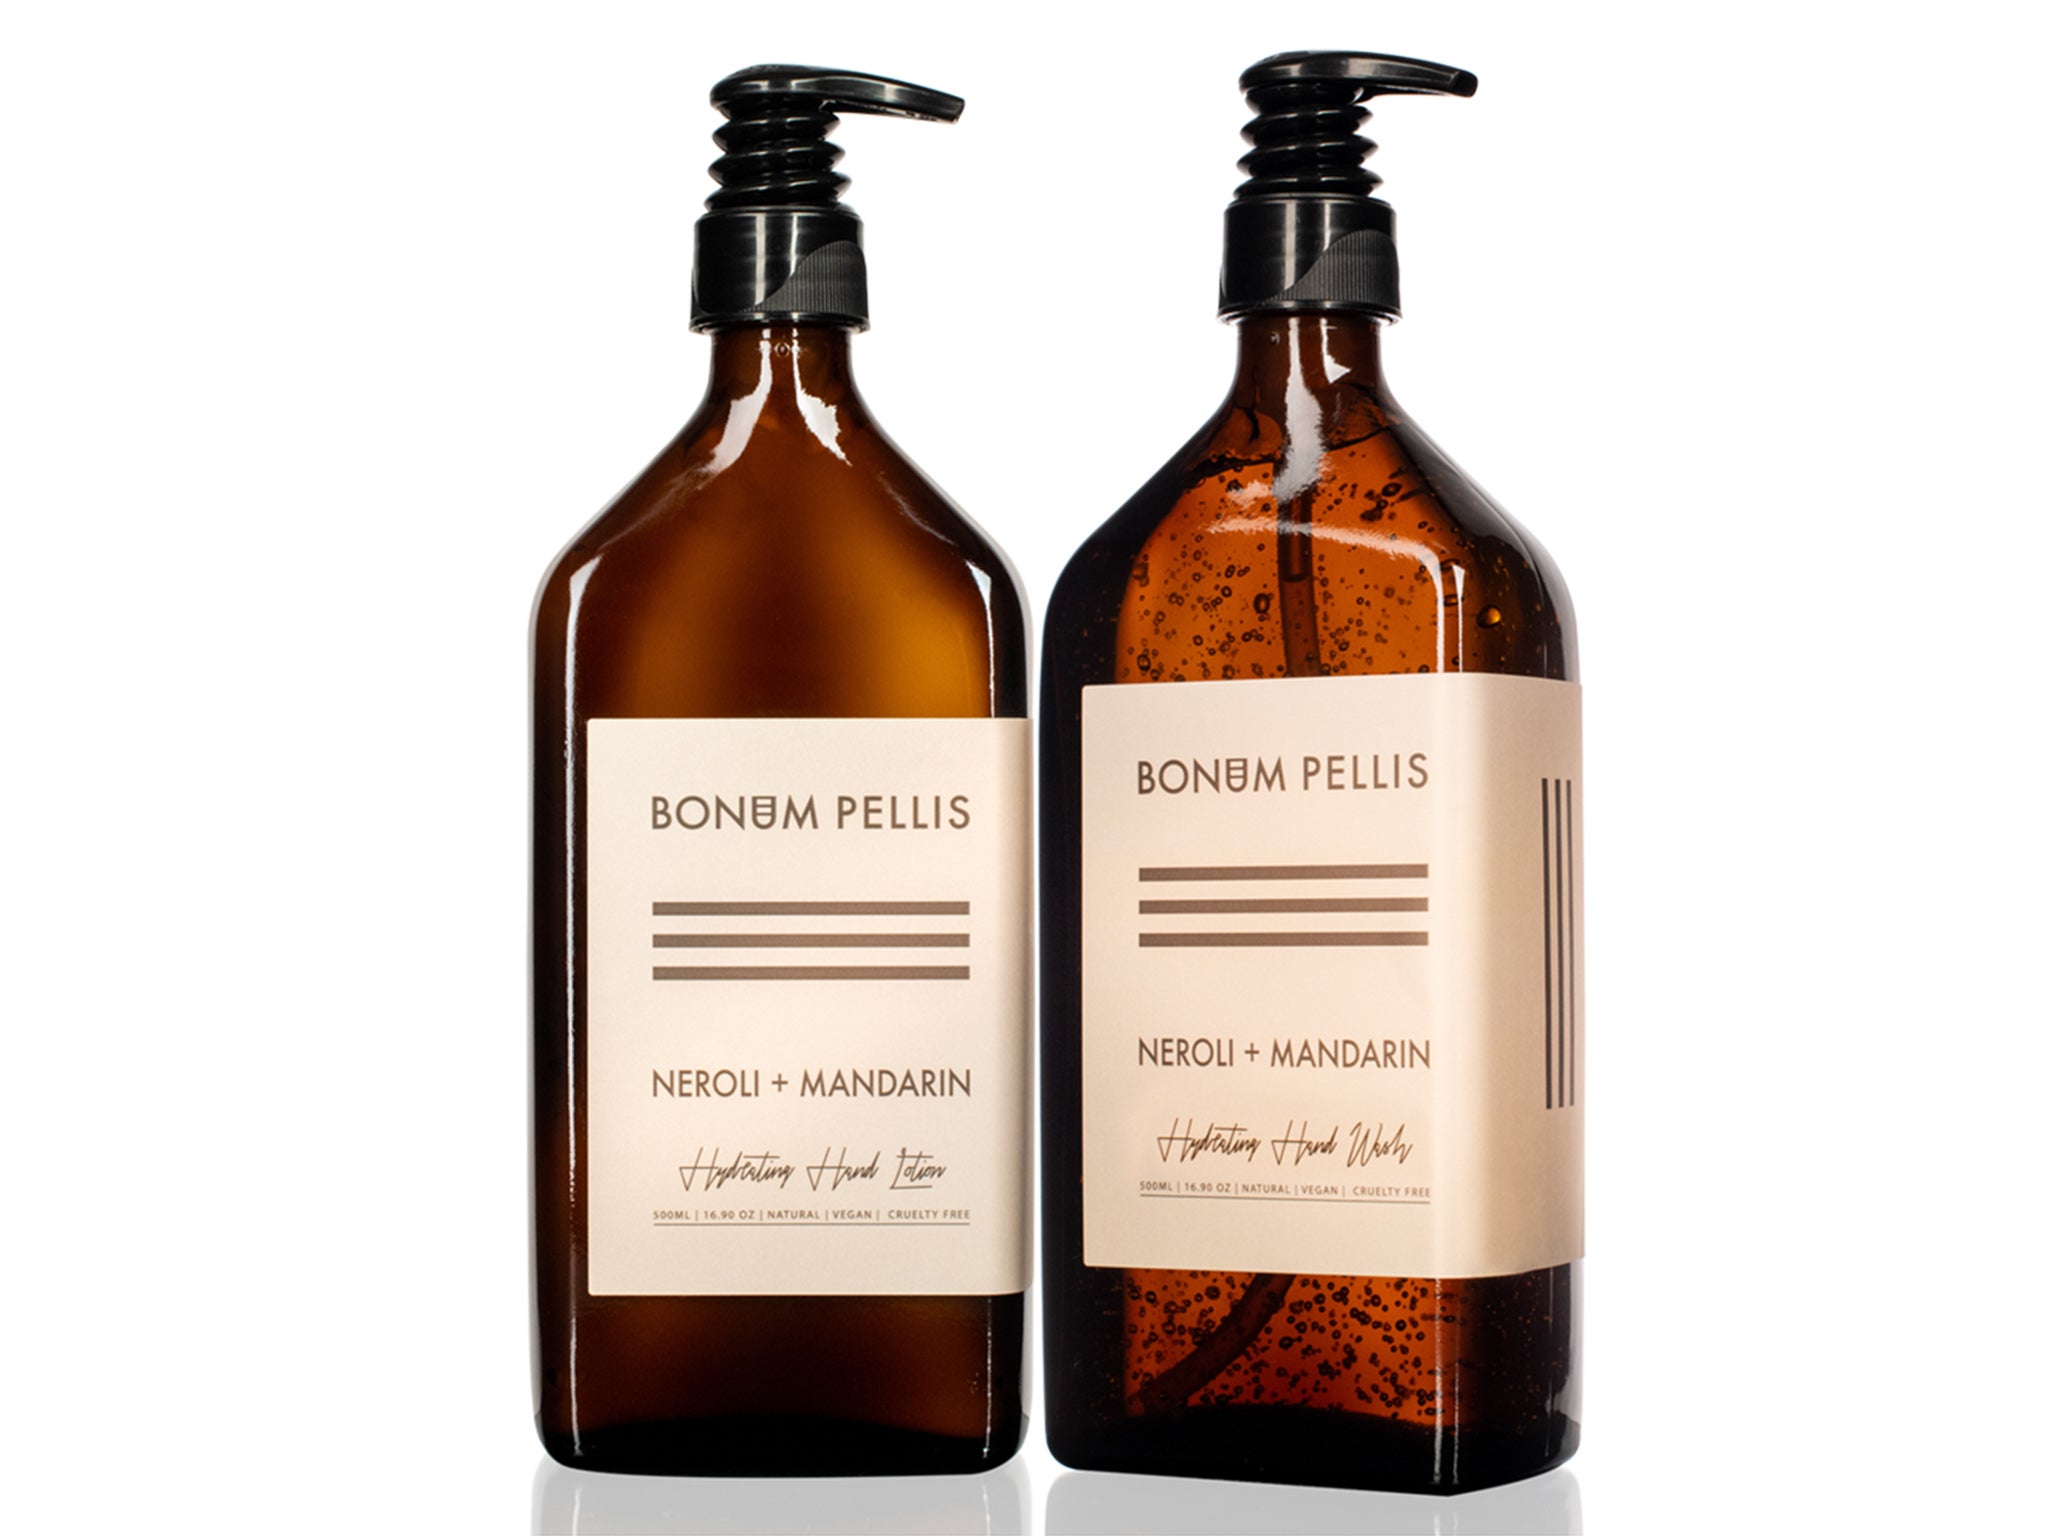 With the extra hand-washing needed, this duo adds a little luxury